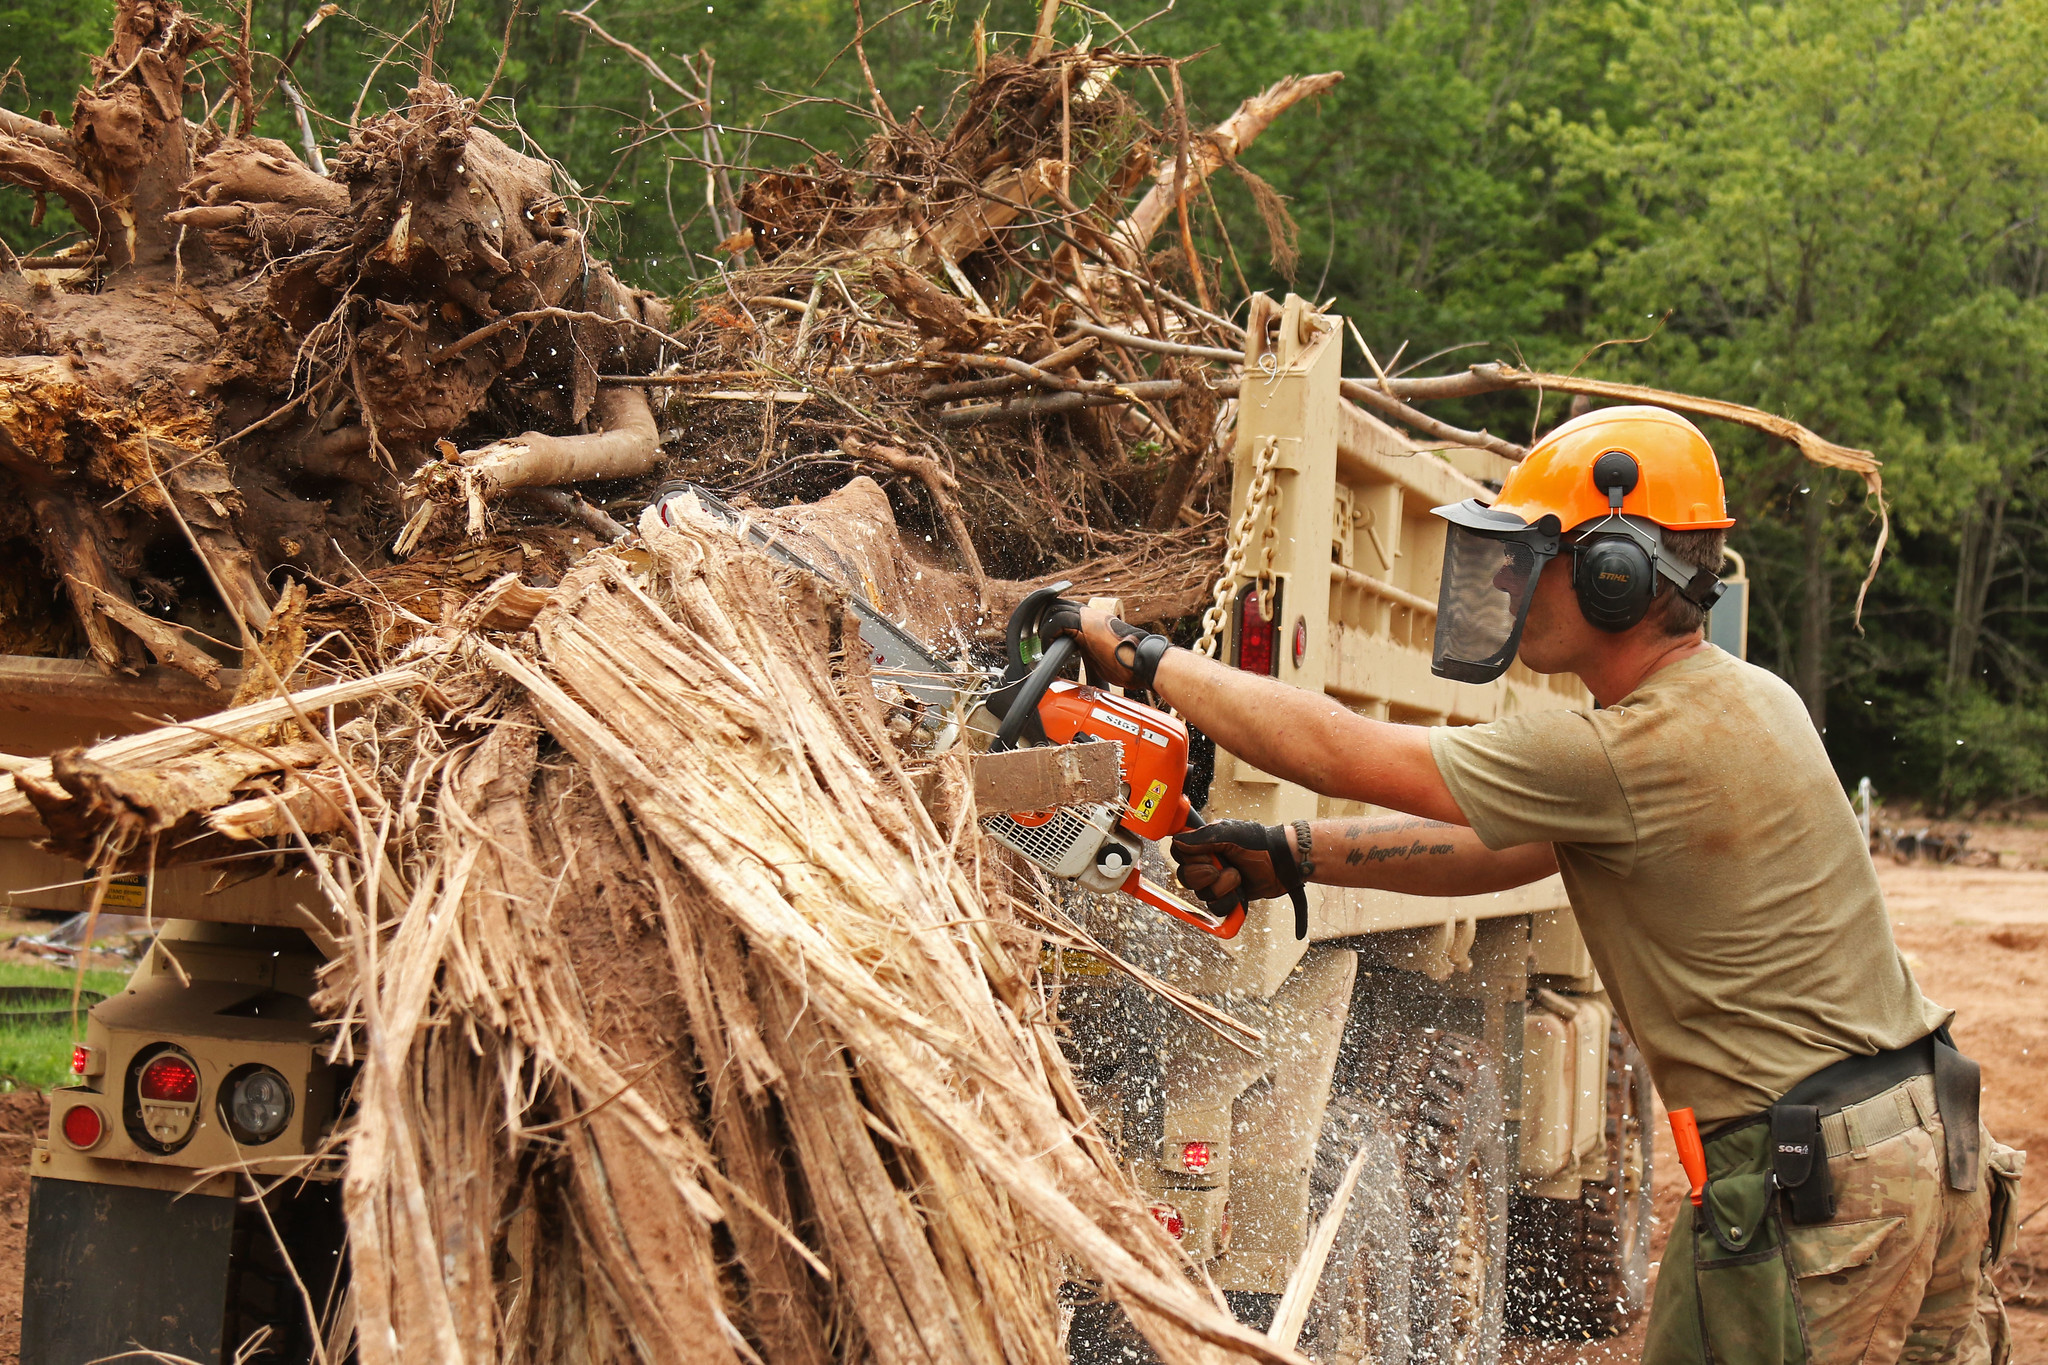 Spc. Justin Meagher operates a chain saw to cut up large debris